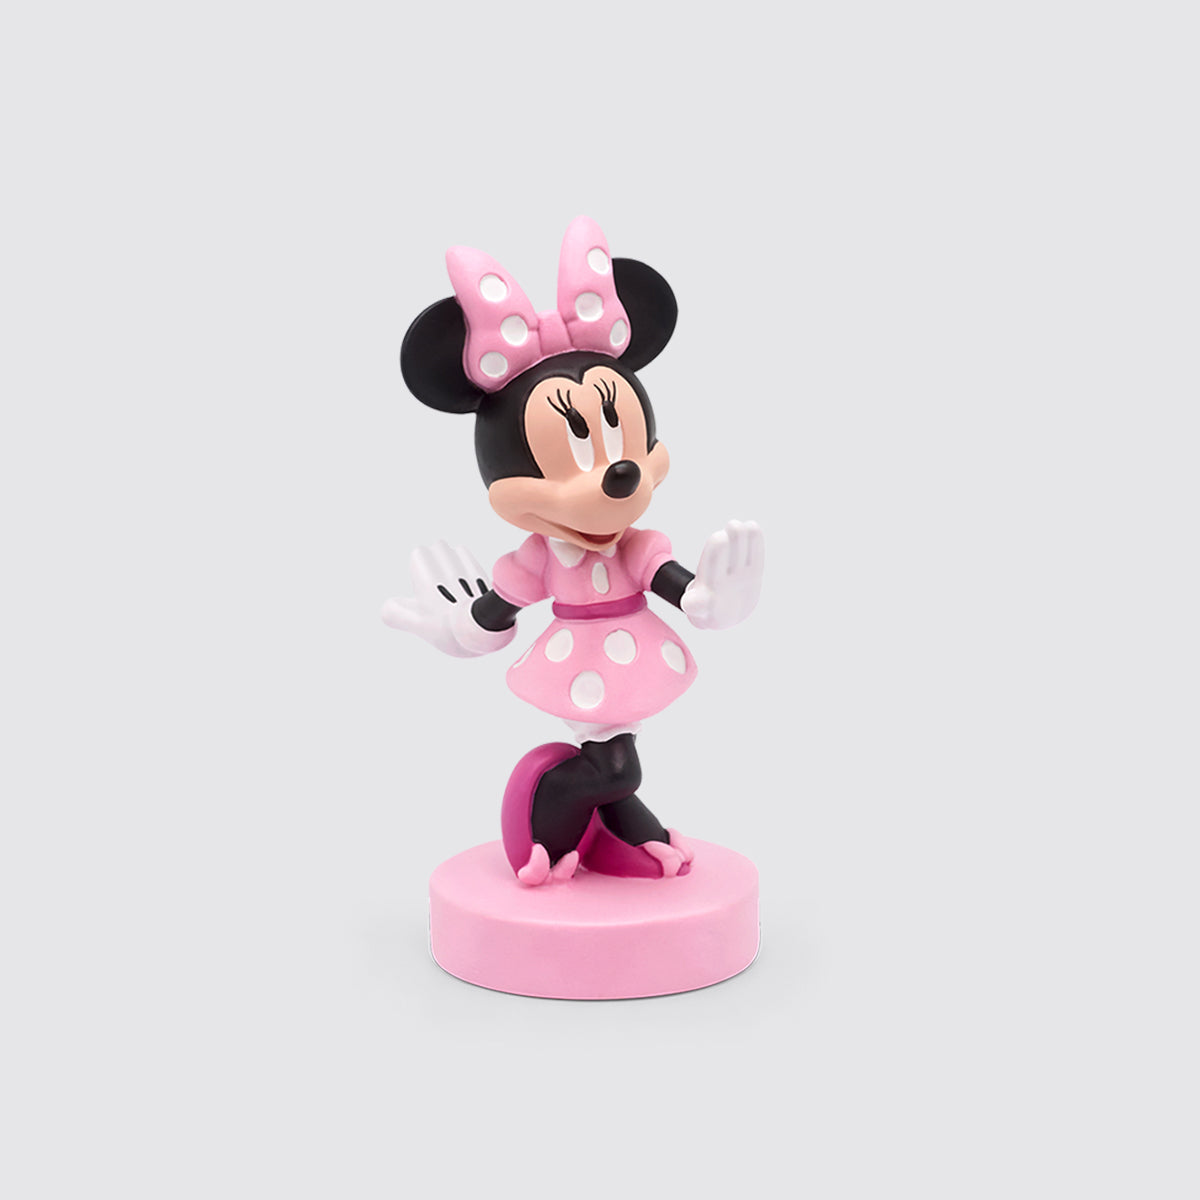 Tonies Disney Audio Play Character: Minnie Mouse